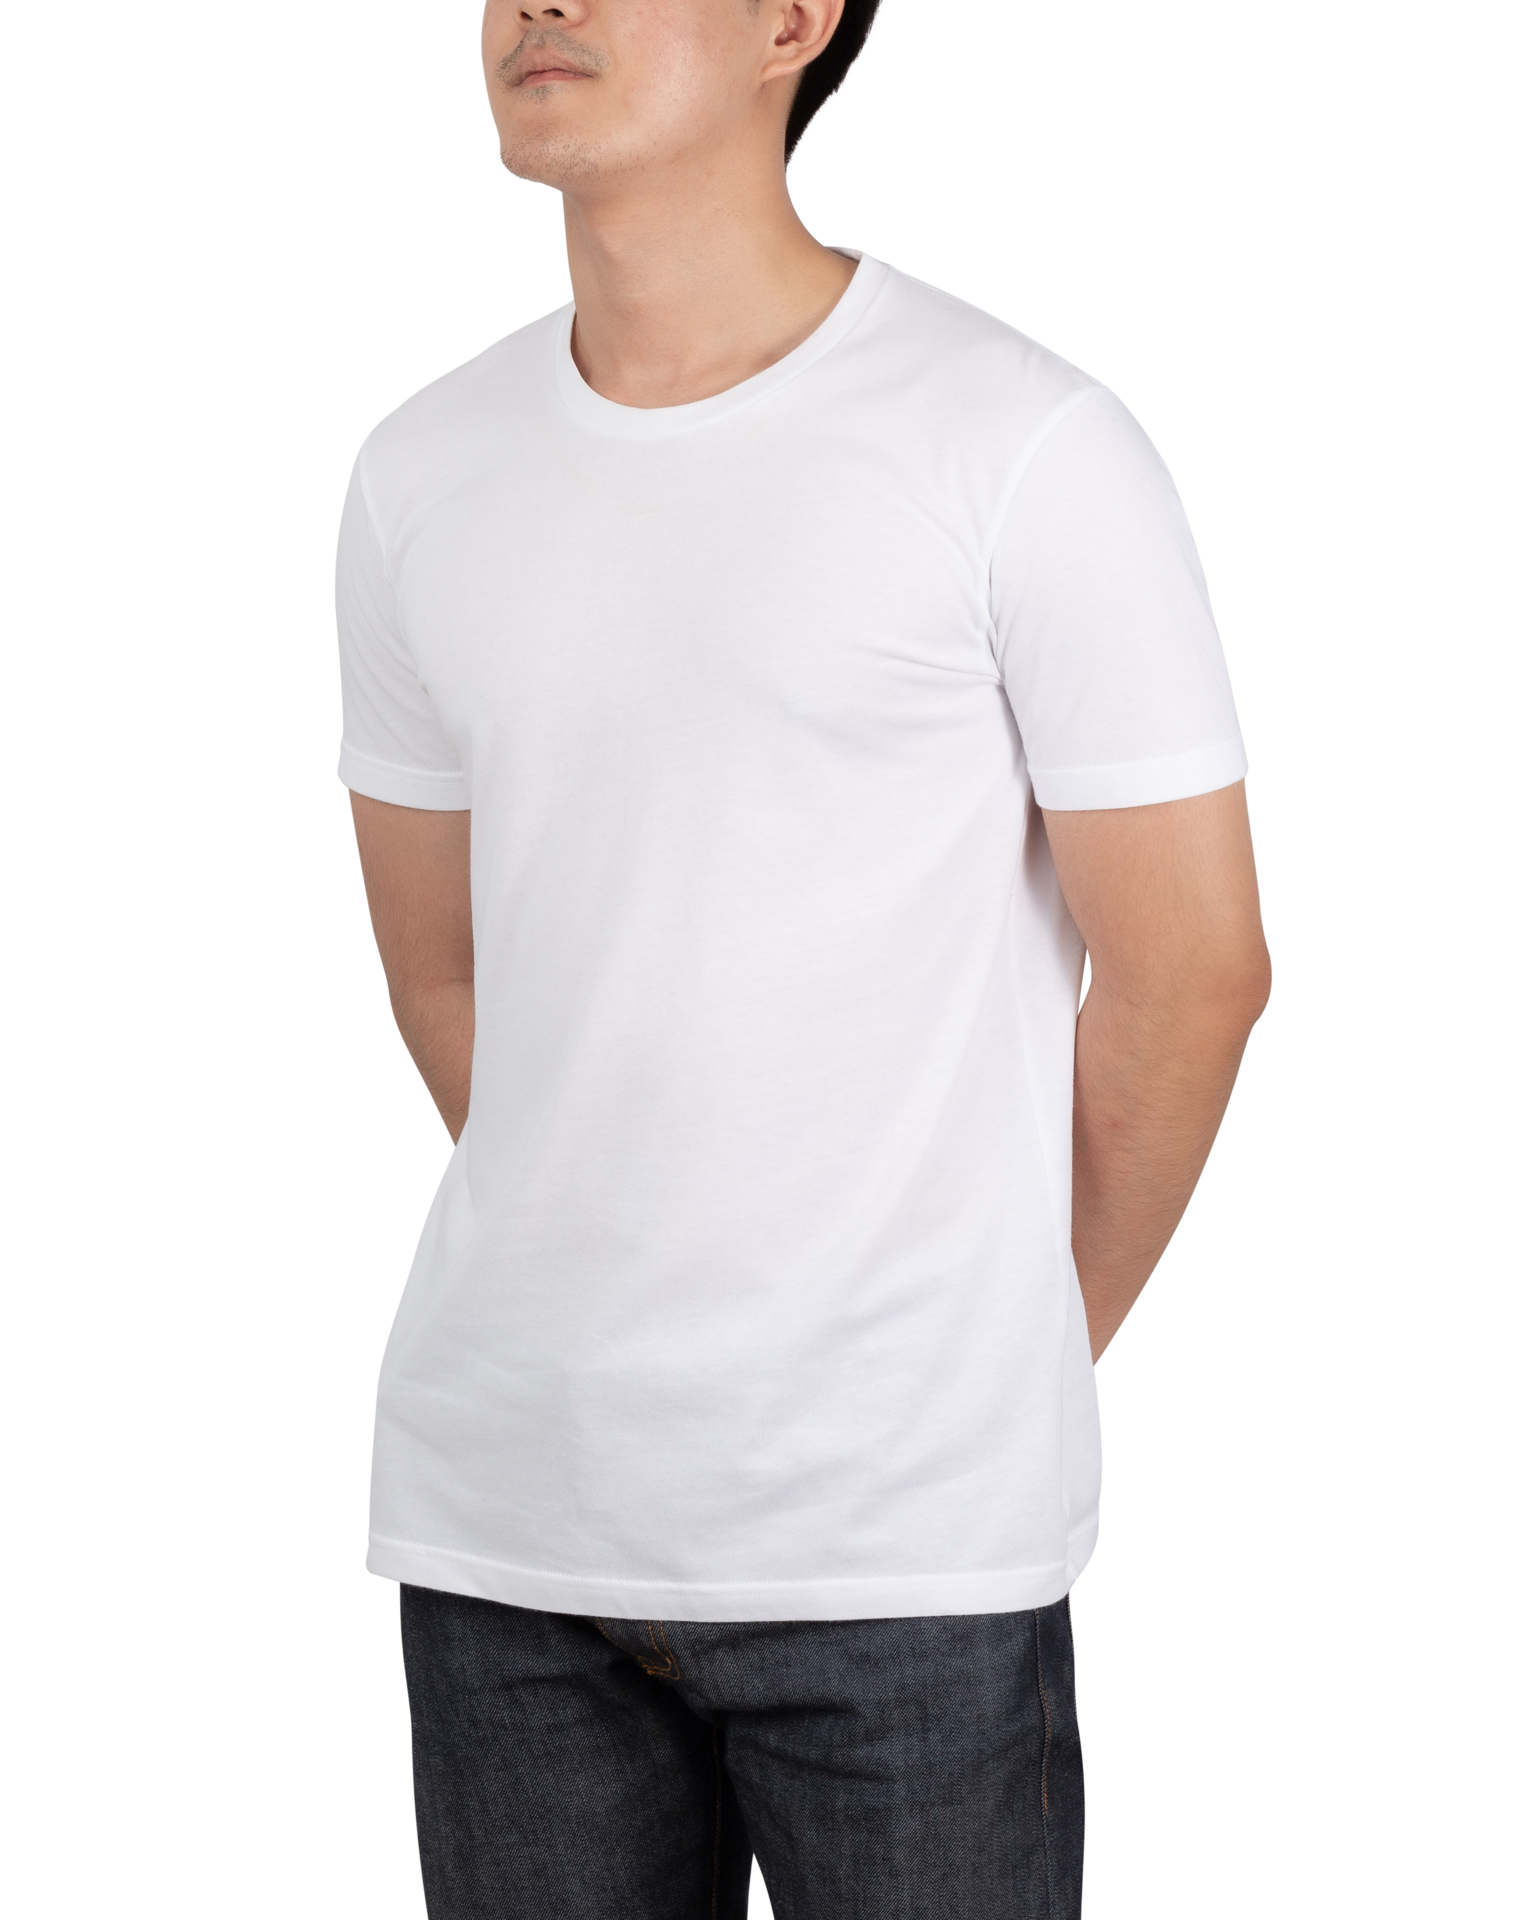 Young man in T shirt mockup, Template for your design 8475944 PNG